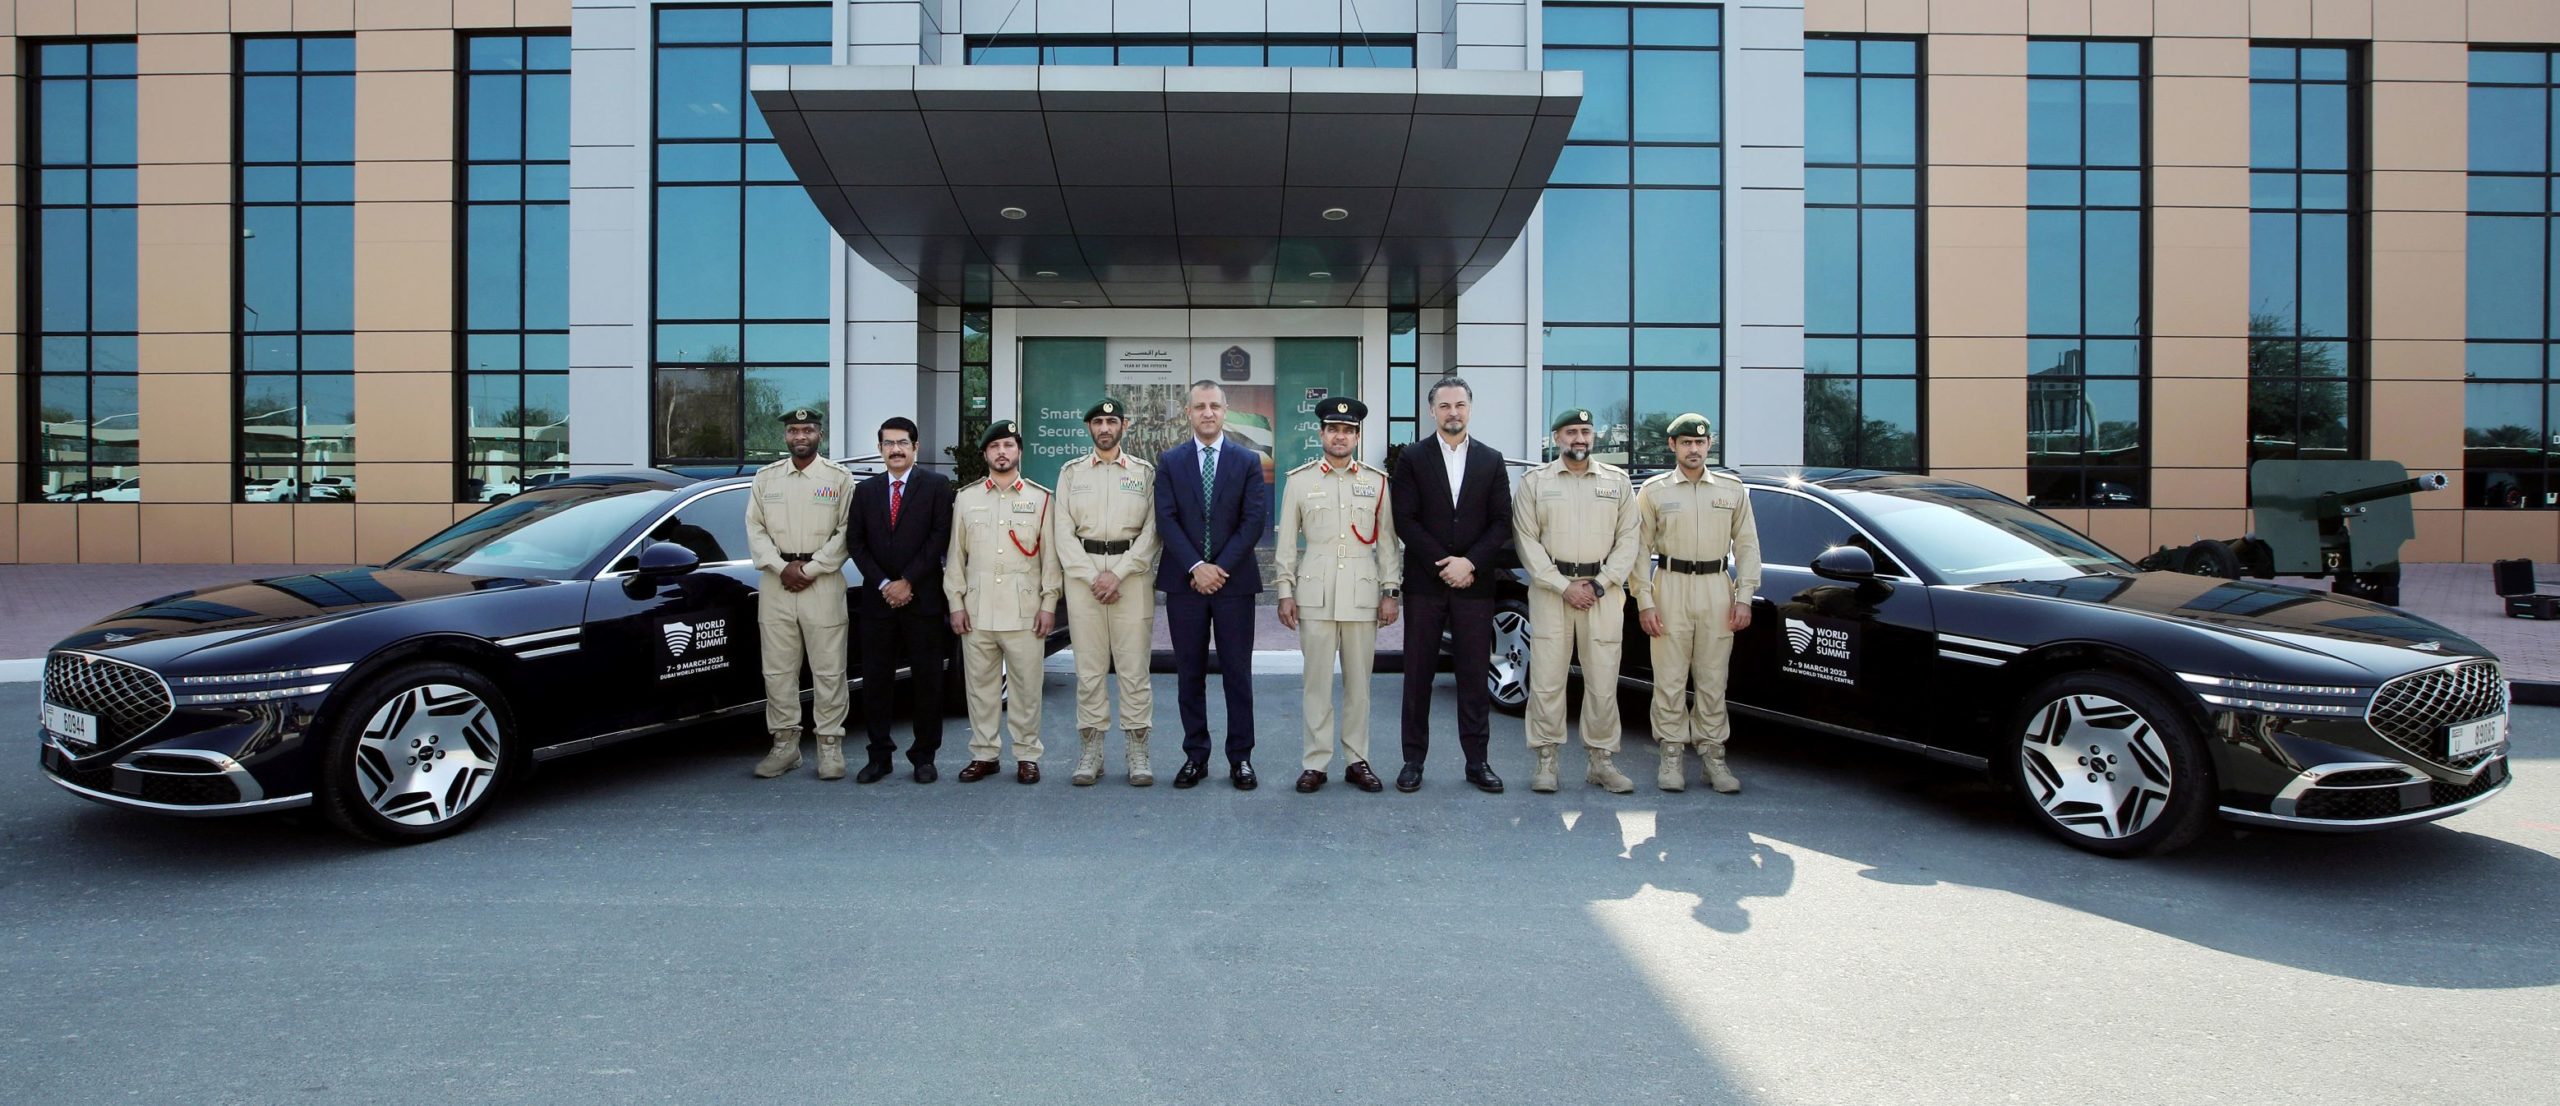 Genesis Motor UAE Announced As Official Automotive Partner For World Police Summit In Dubai